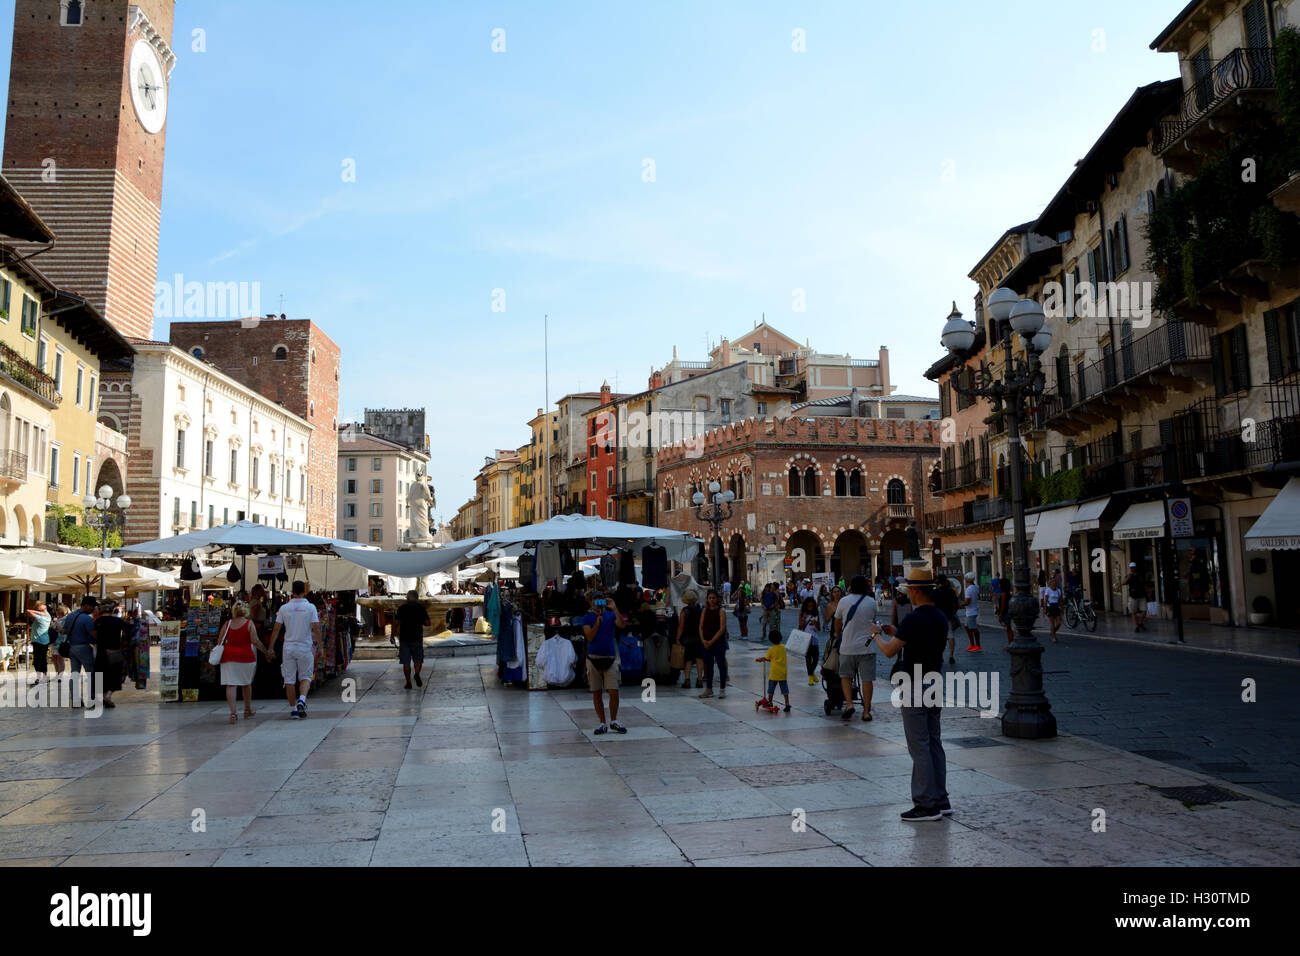 Verona, Italy - September 3, 2016: Piazza Delle Erbe square in Verona, Italy. Unidentified people visible. Stock Photo